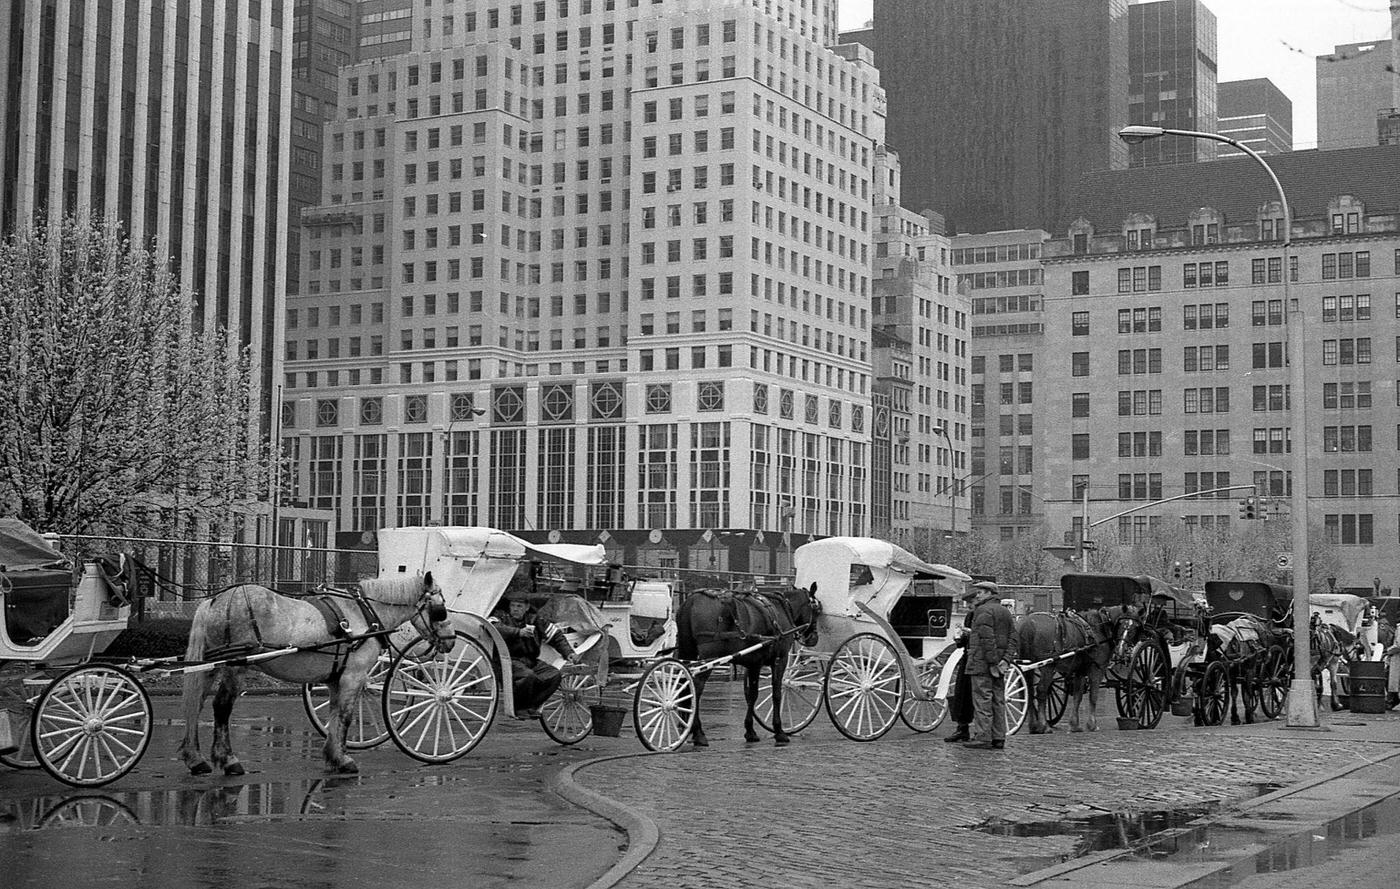 Coachmen At Grand Army Plaza, Waiting With Their Horse-Drawn Carriages, Manhattan, 1989